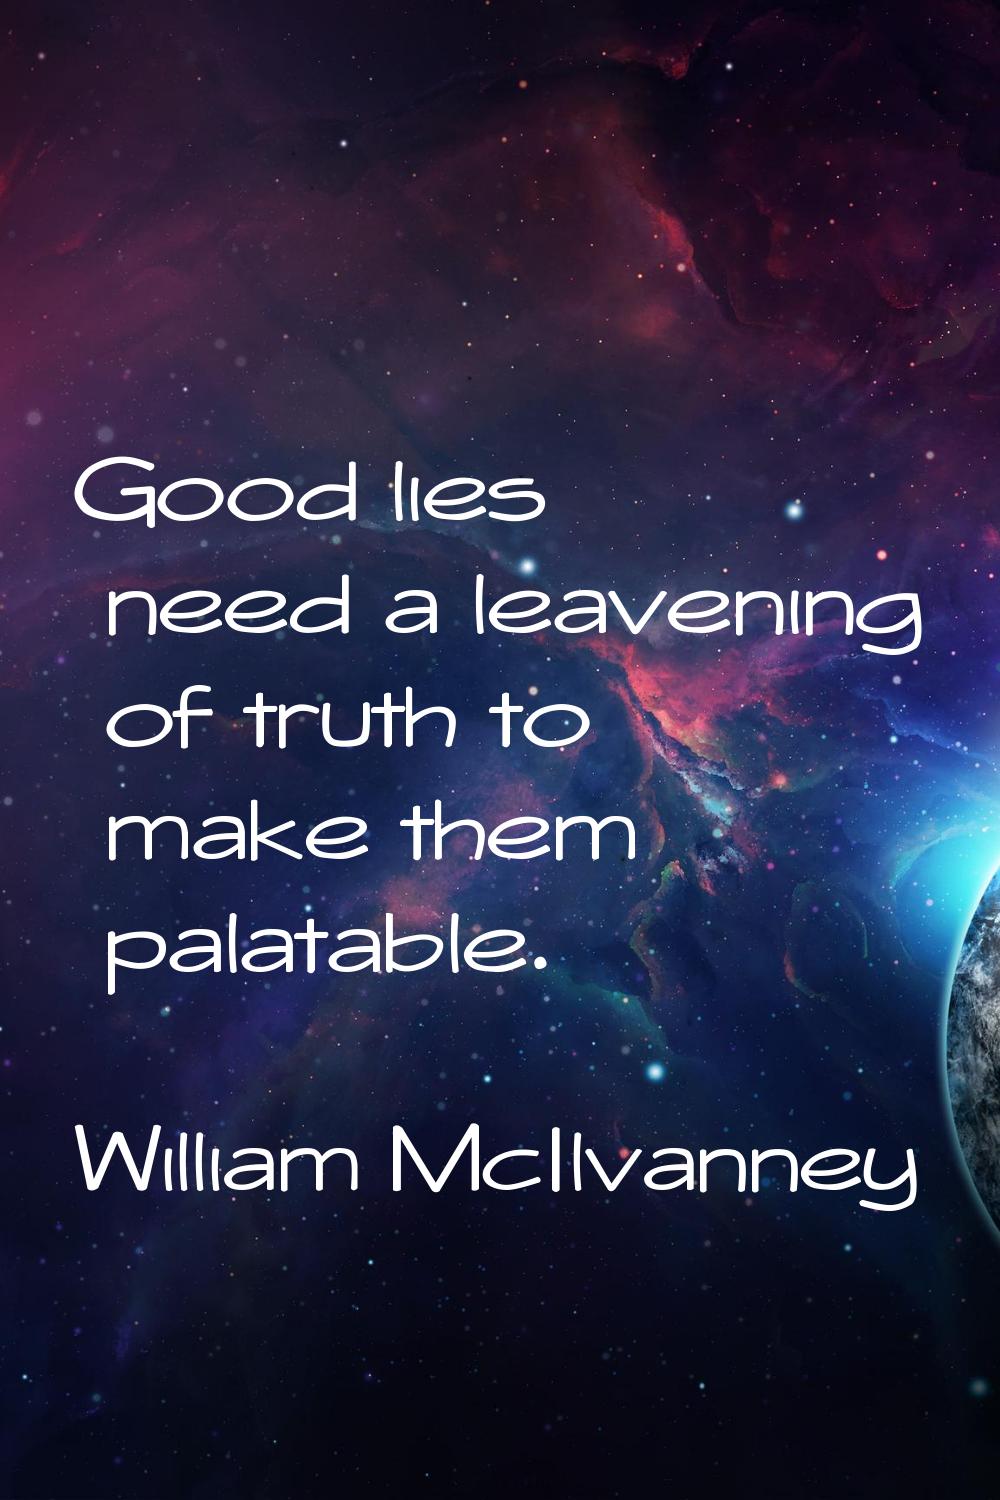 Good lies need a leavening of truth to make them palatable.